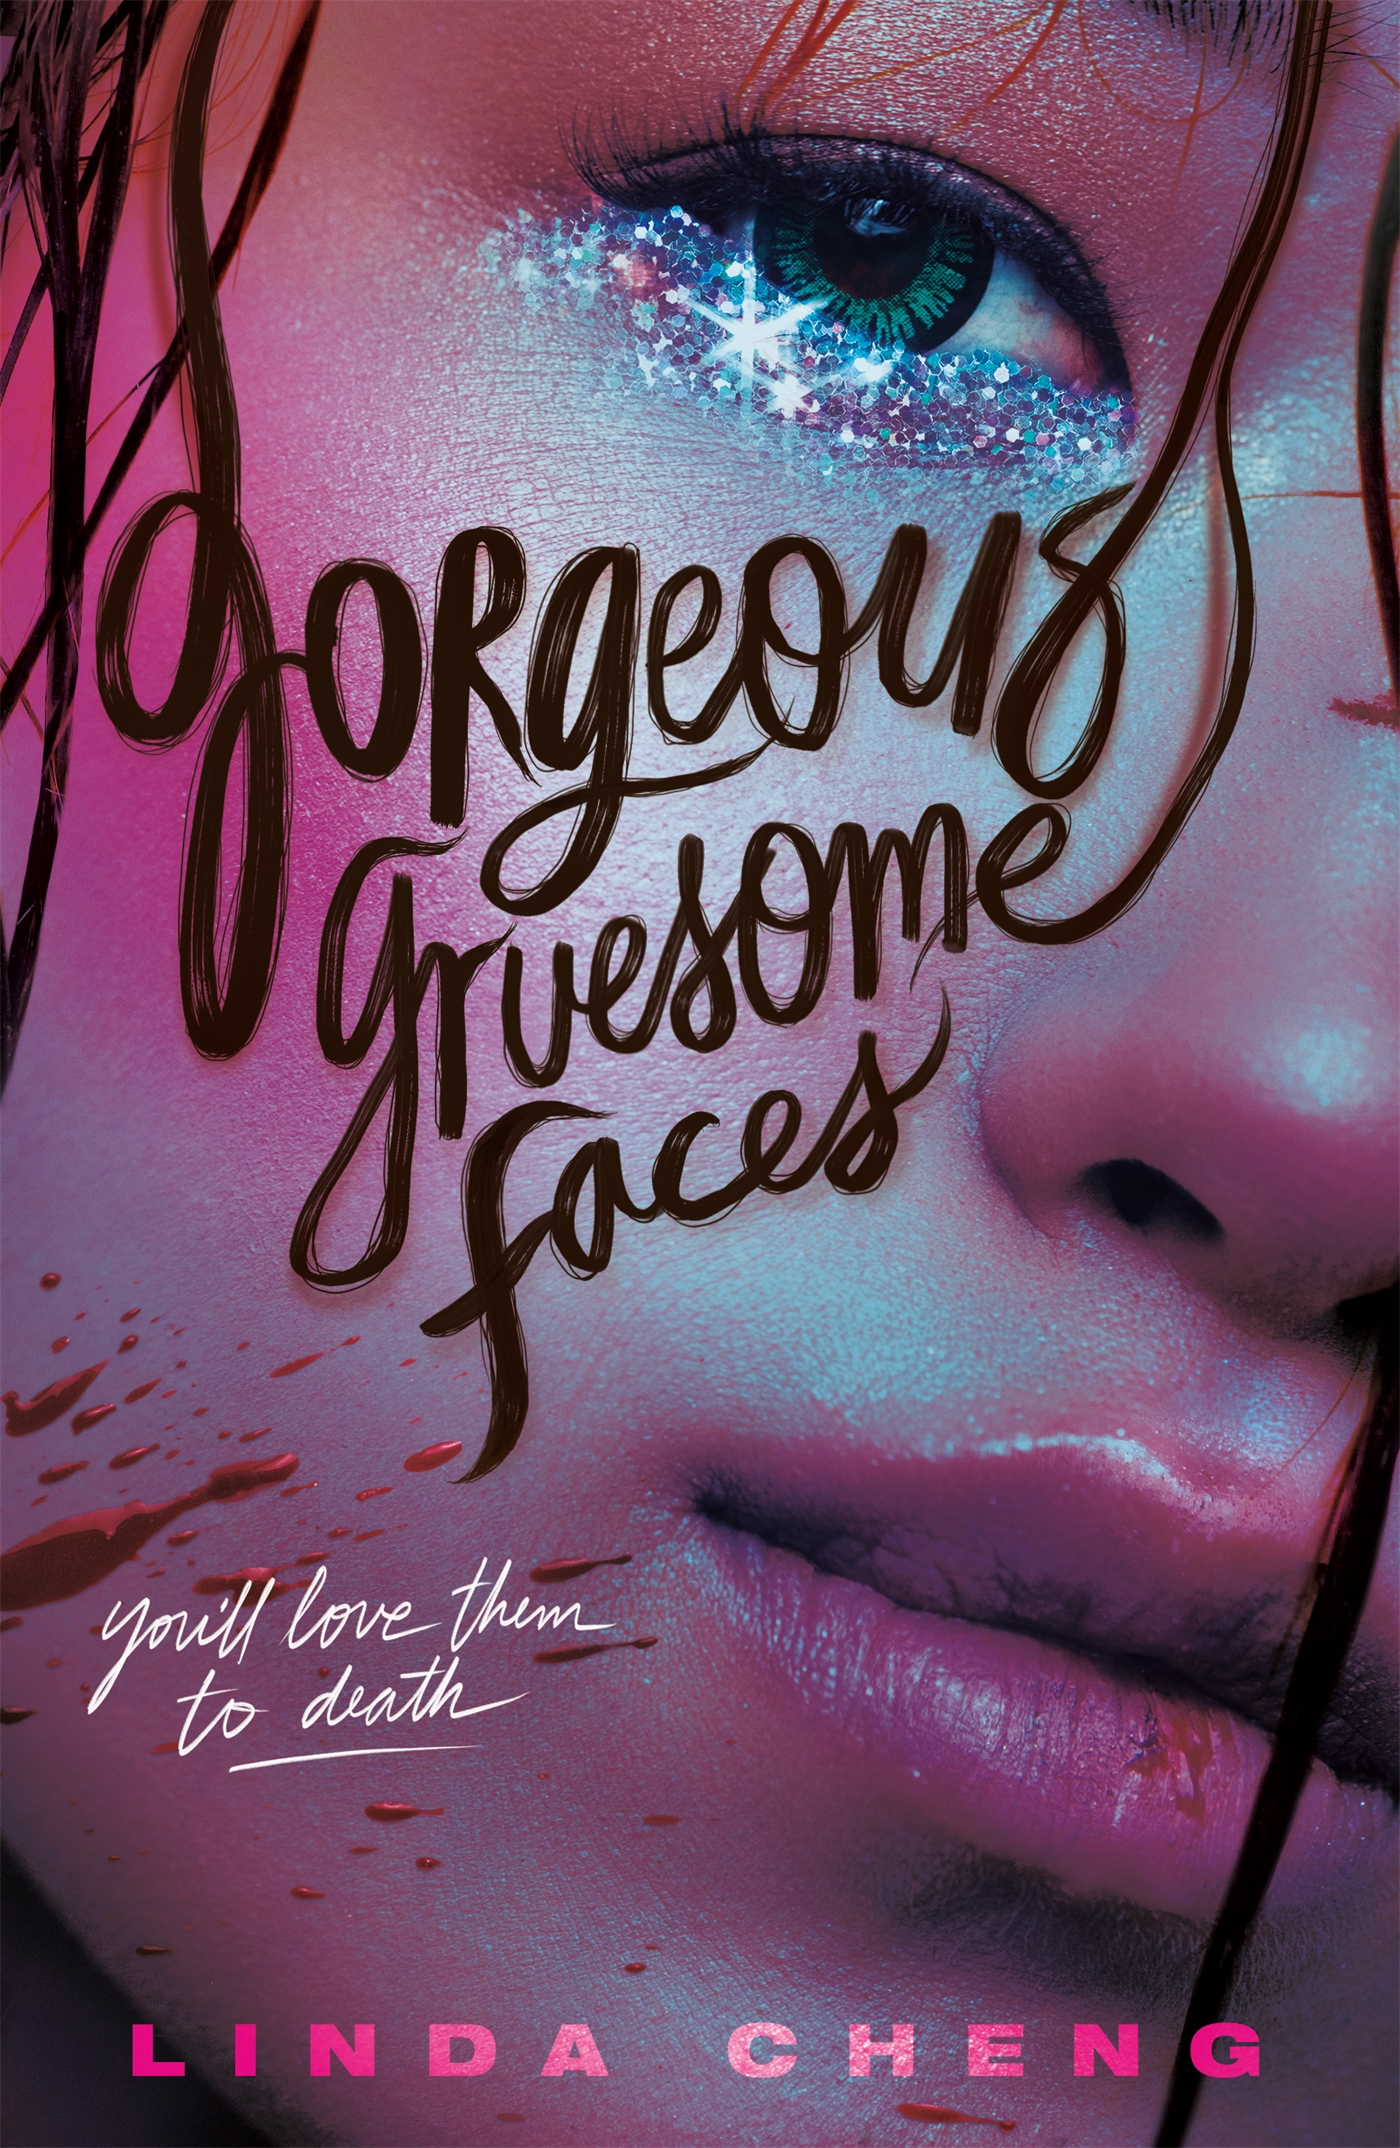 Book Gorgeous Gruesome Faces